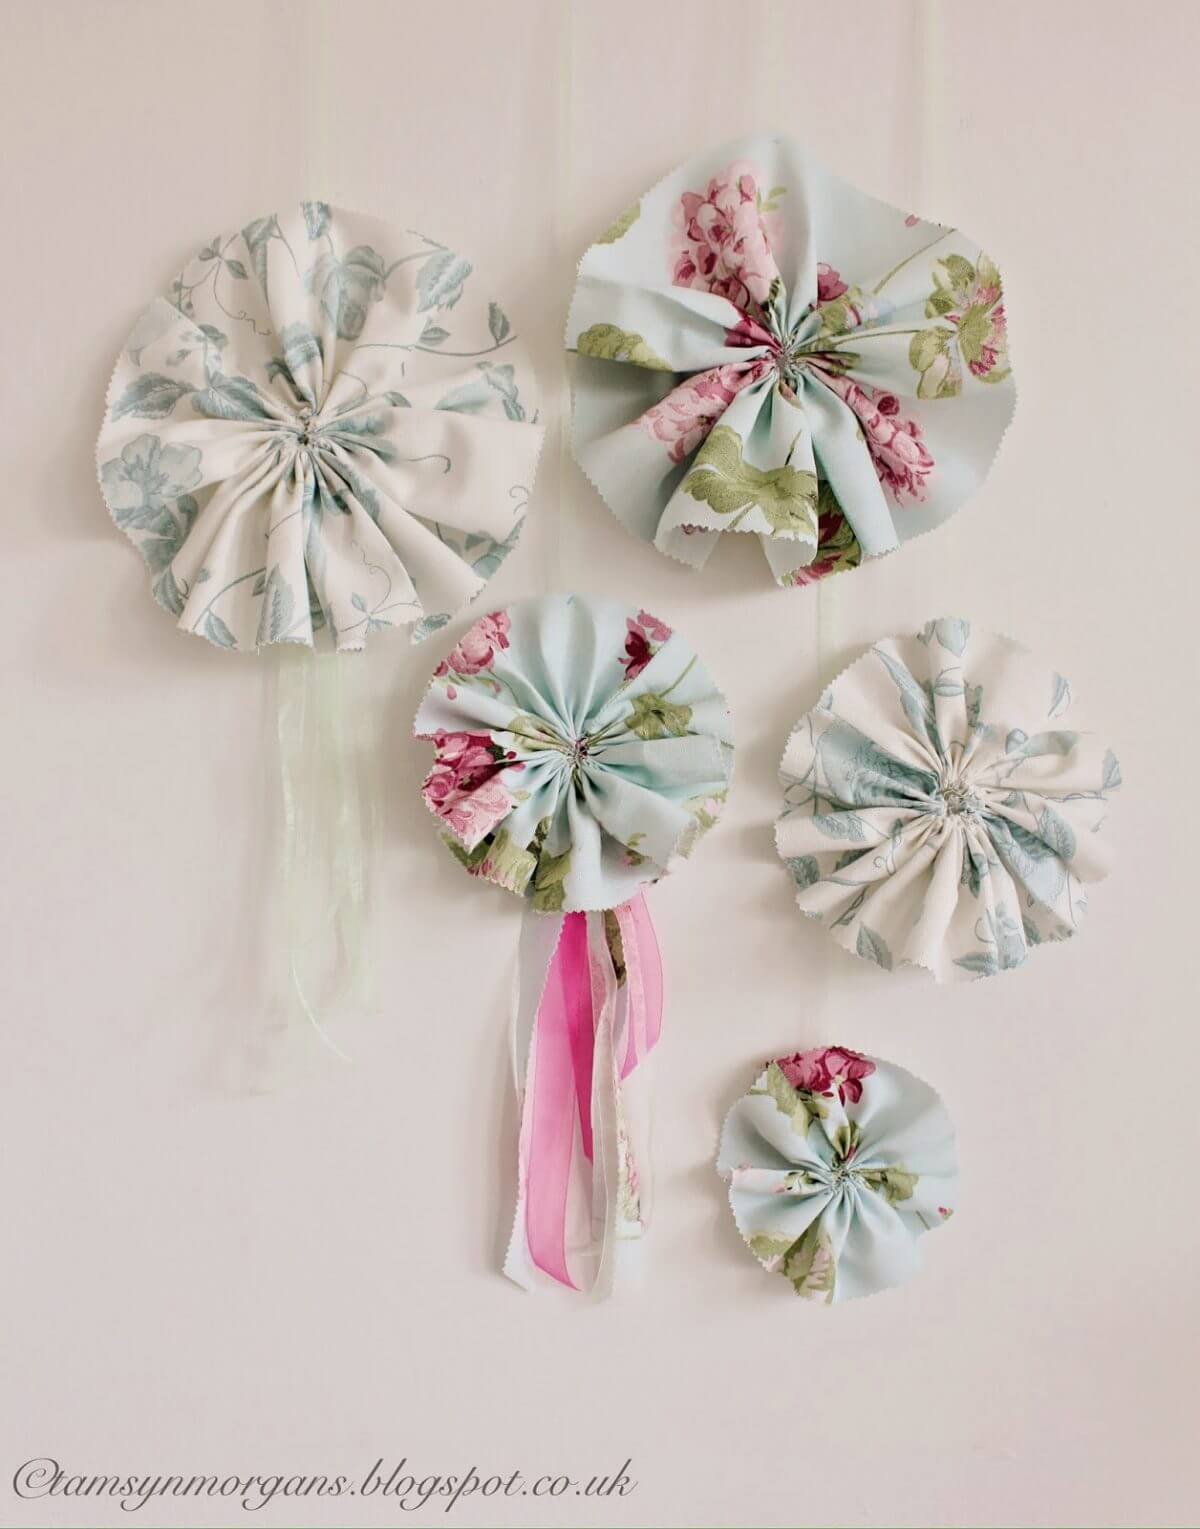 Amazing Rosette Crafts For Easy & DIY Fabric Flower